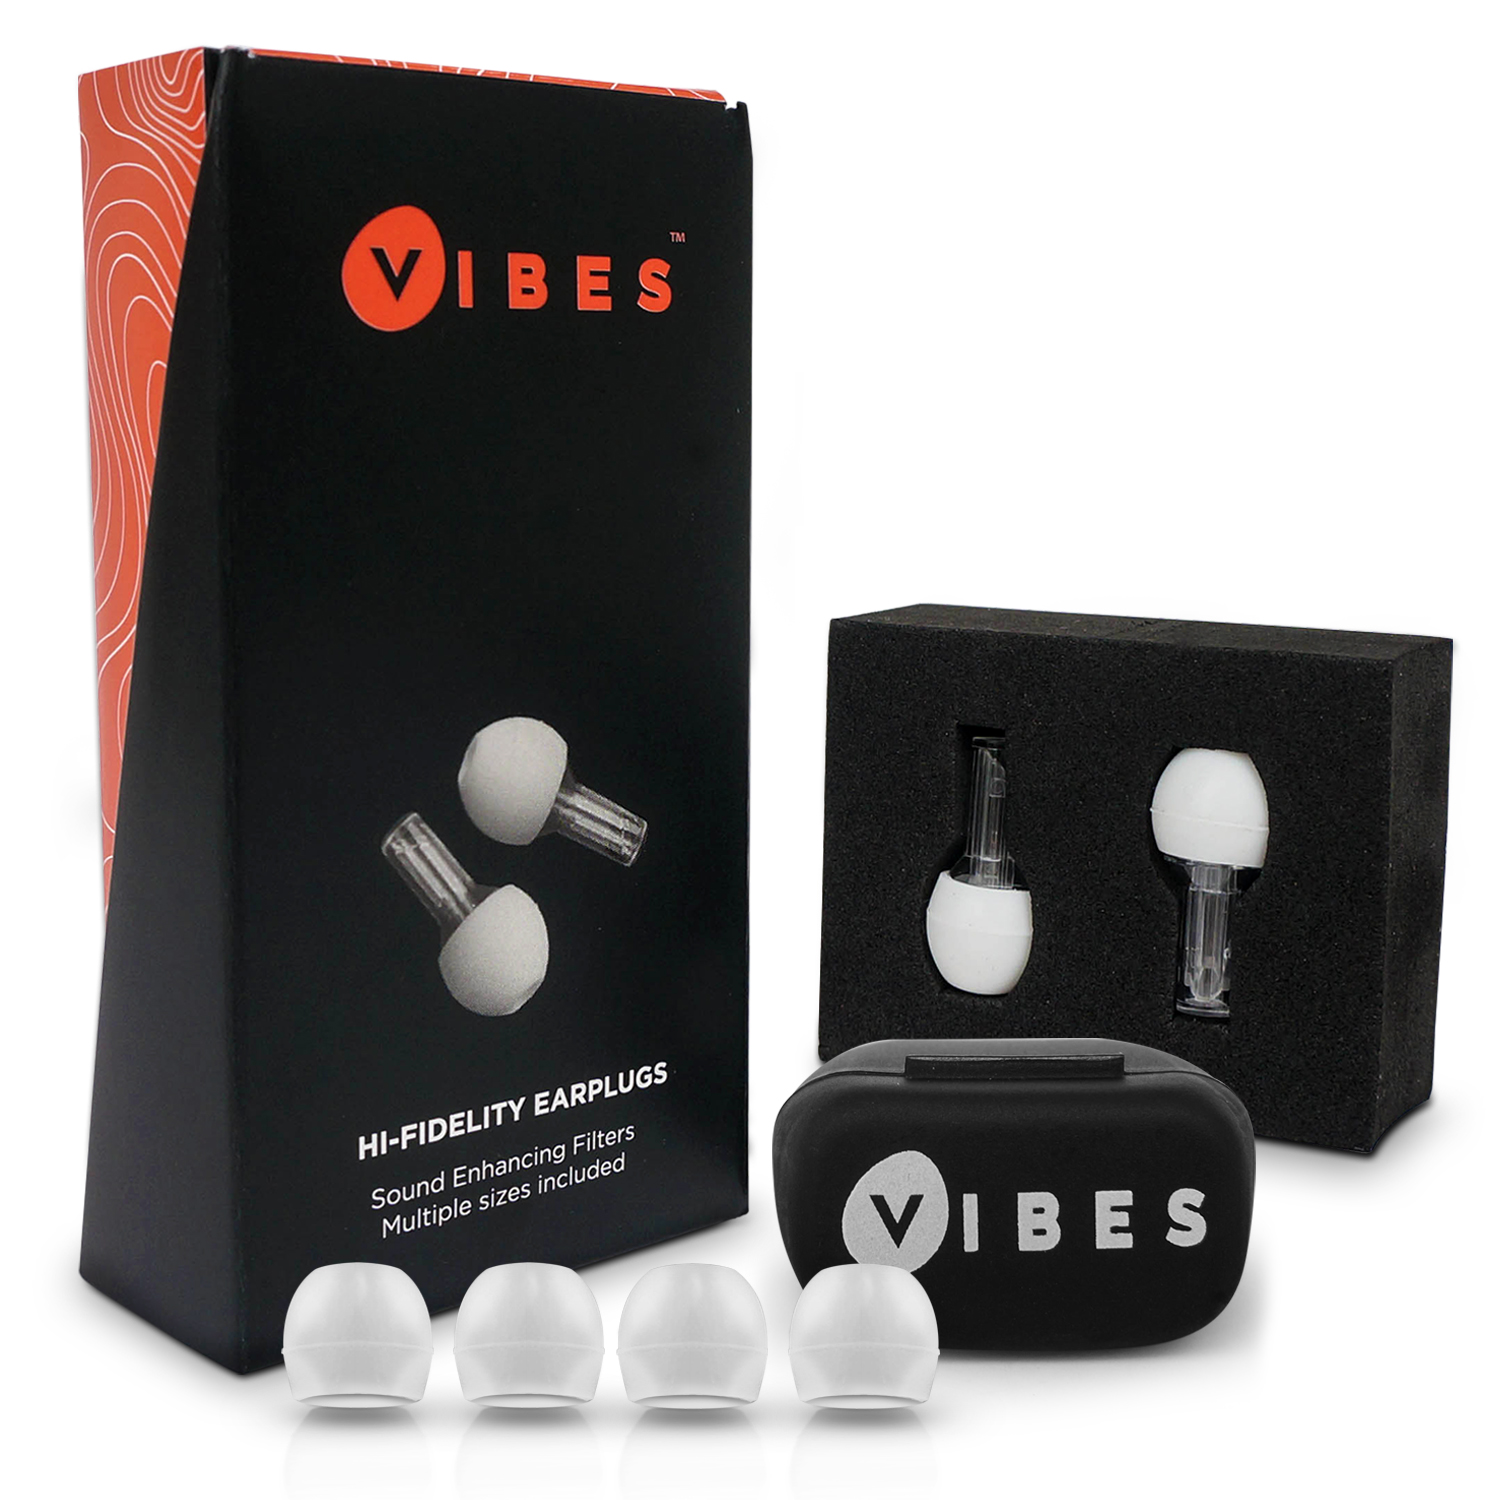 Vibes Reusable Acoustic Filter Low Profile Comfort Fit Noise Reducing Hi-Fidelity Earplugs - image 1 of 3